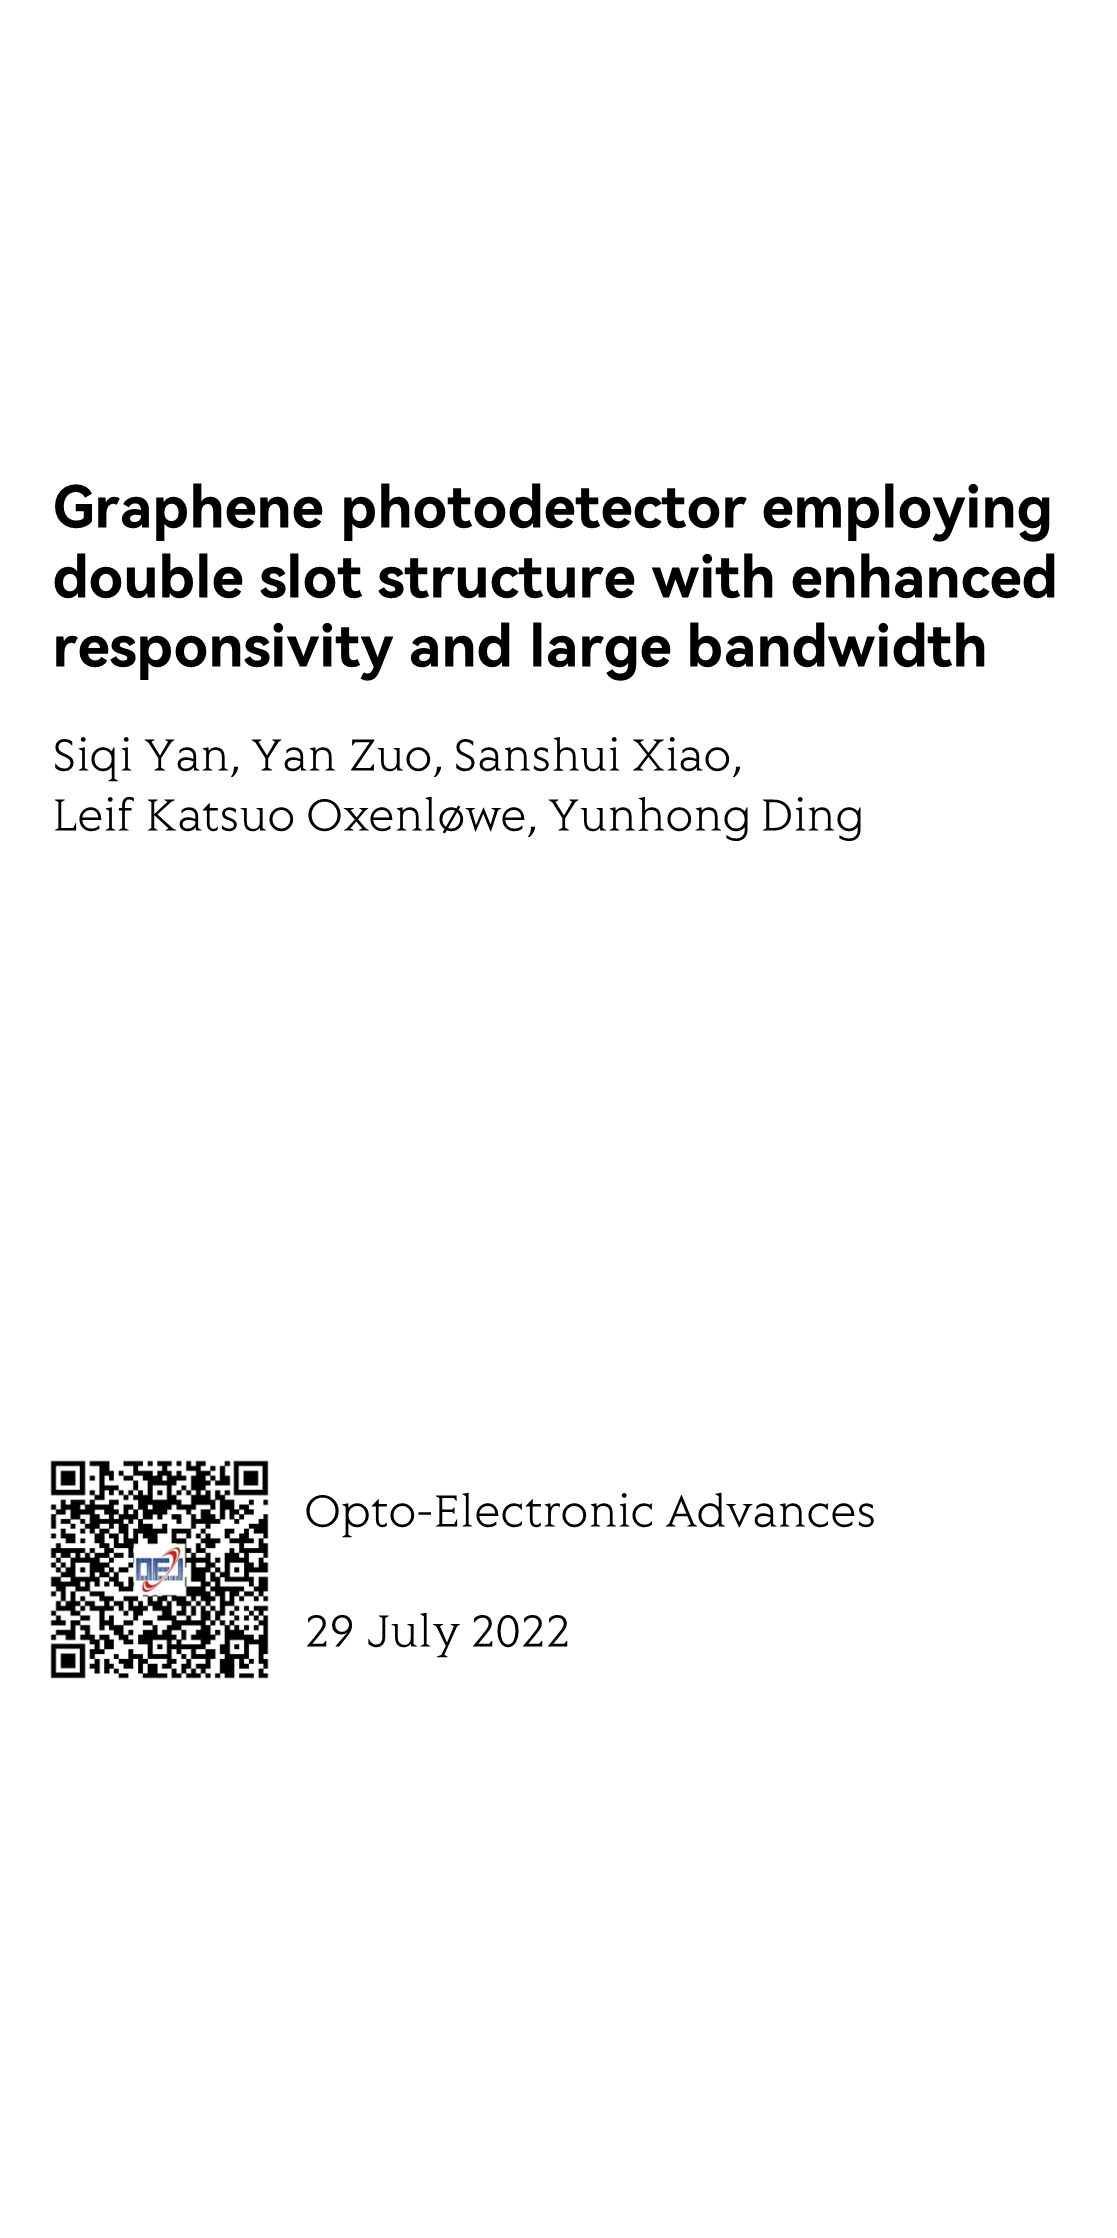 Graphene photodetector employing double slot structure with enhanced responsivity and large bandwidth_1